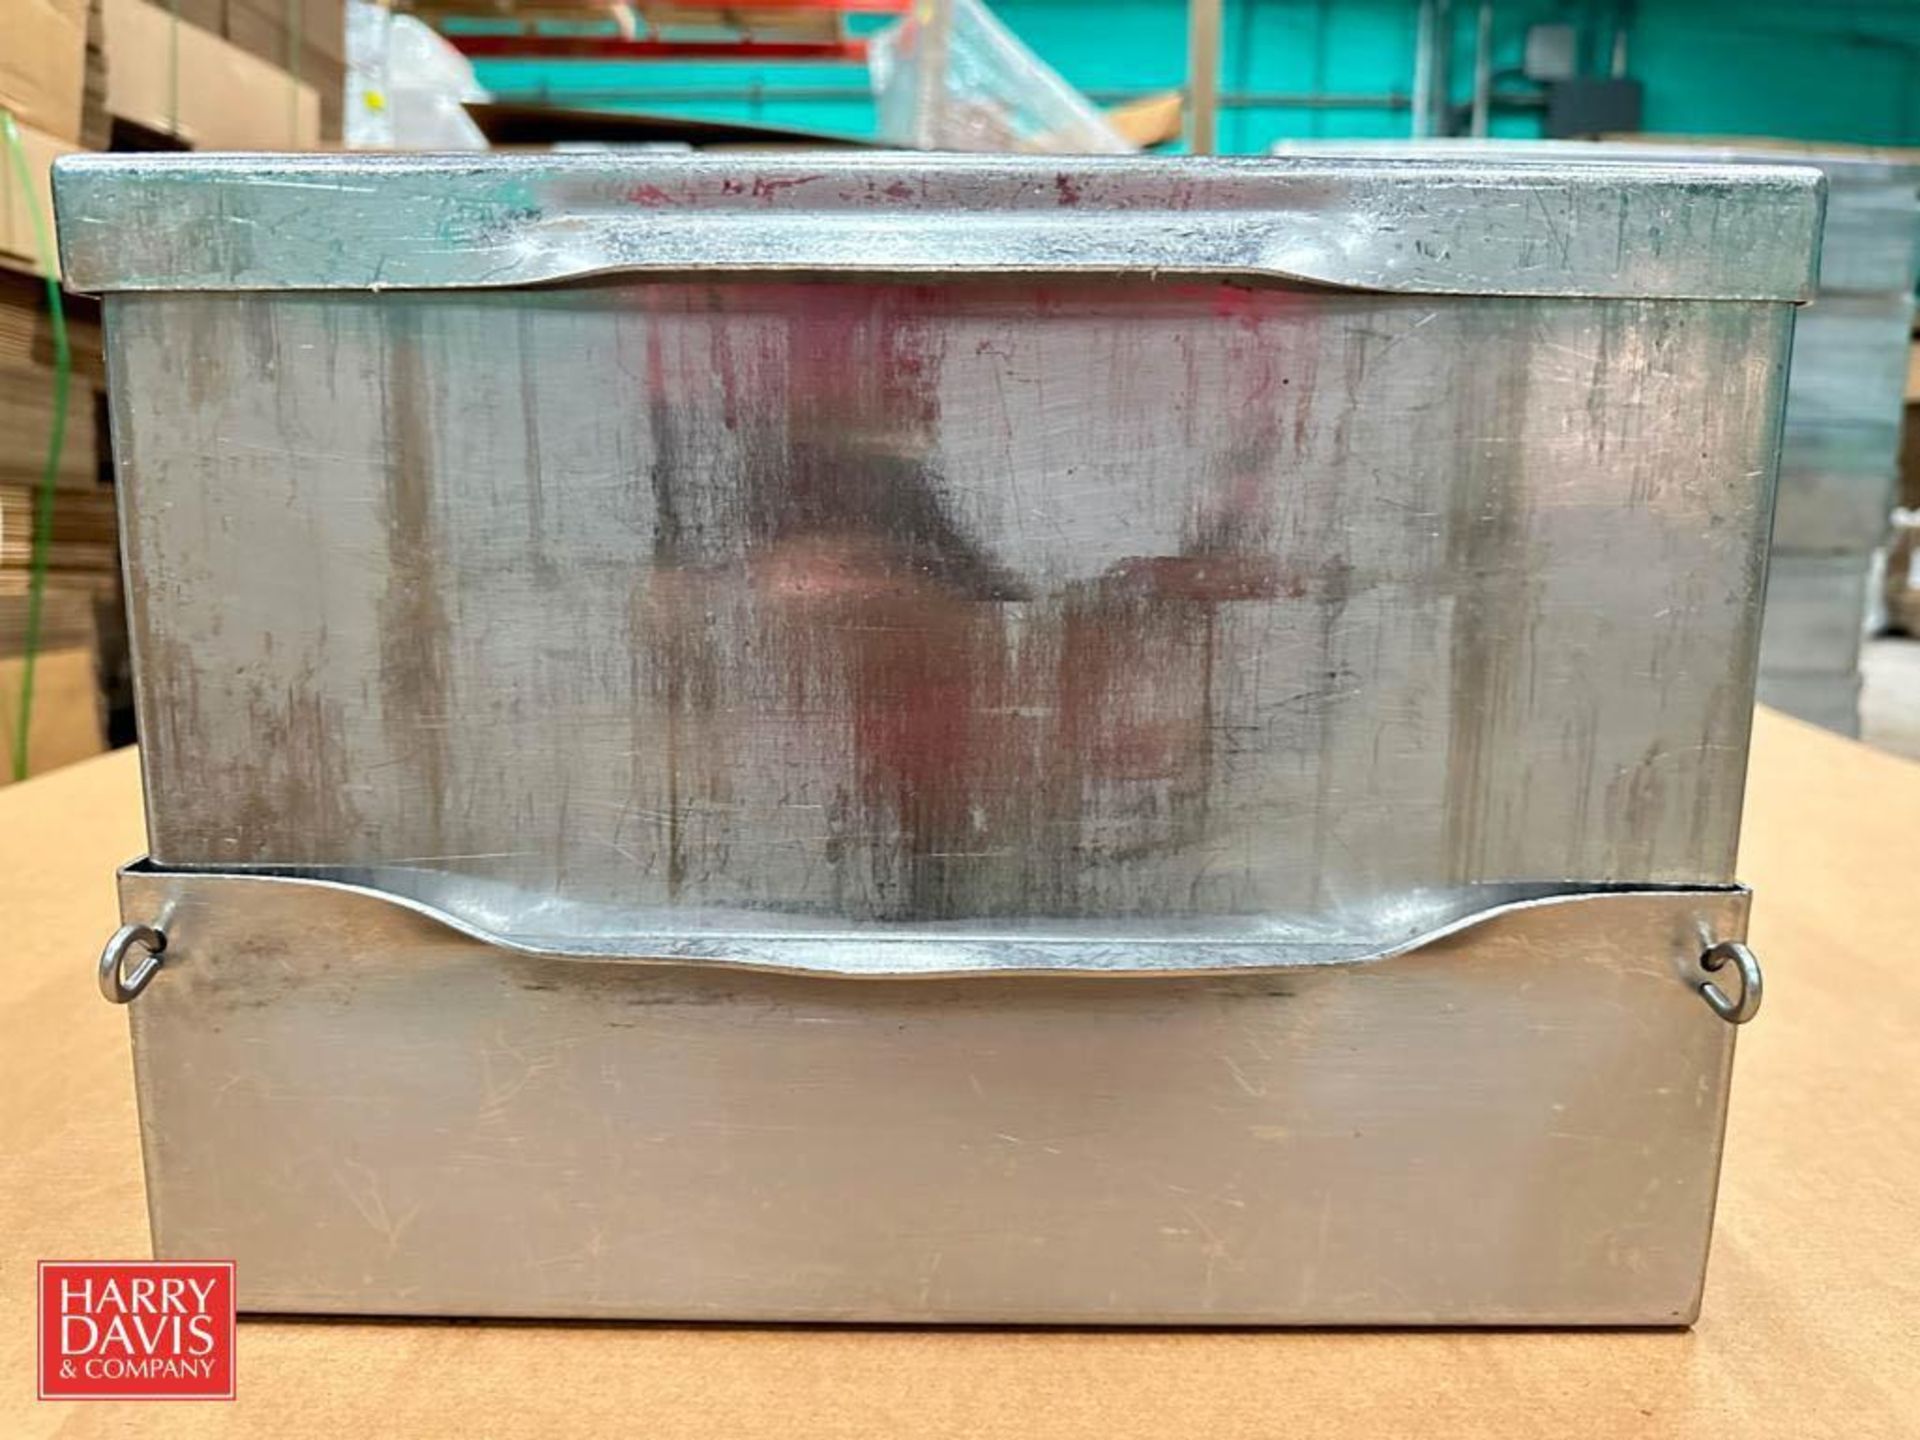 (30) S/S Cheese Block Molds: 14" x 11" x 6.5” and Parts